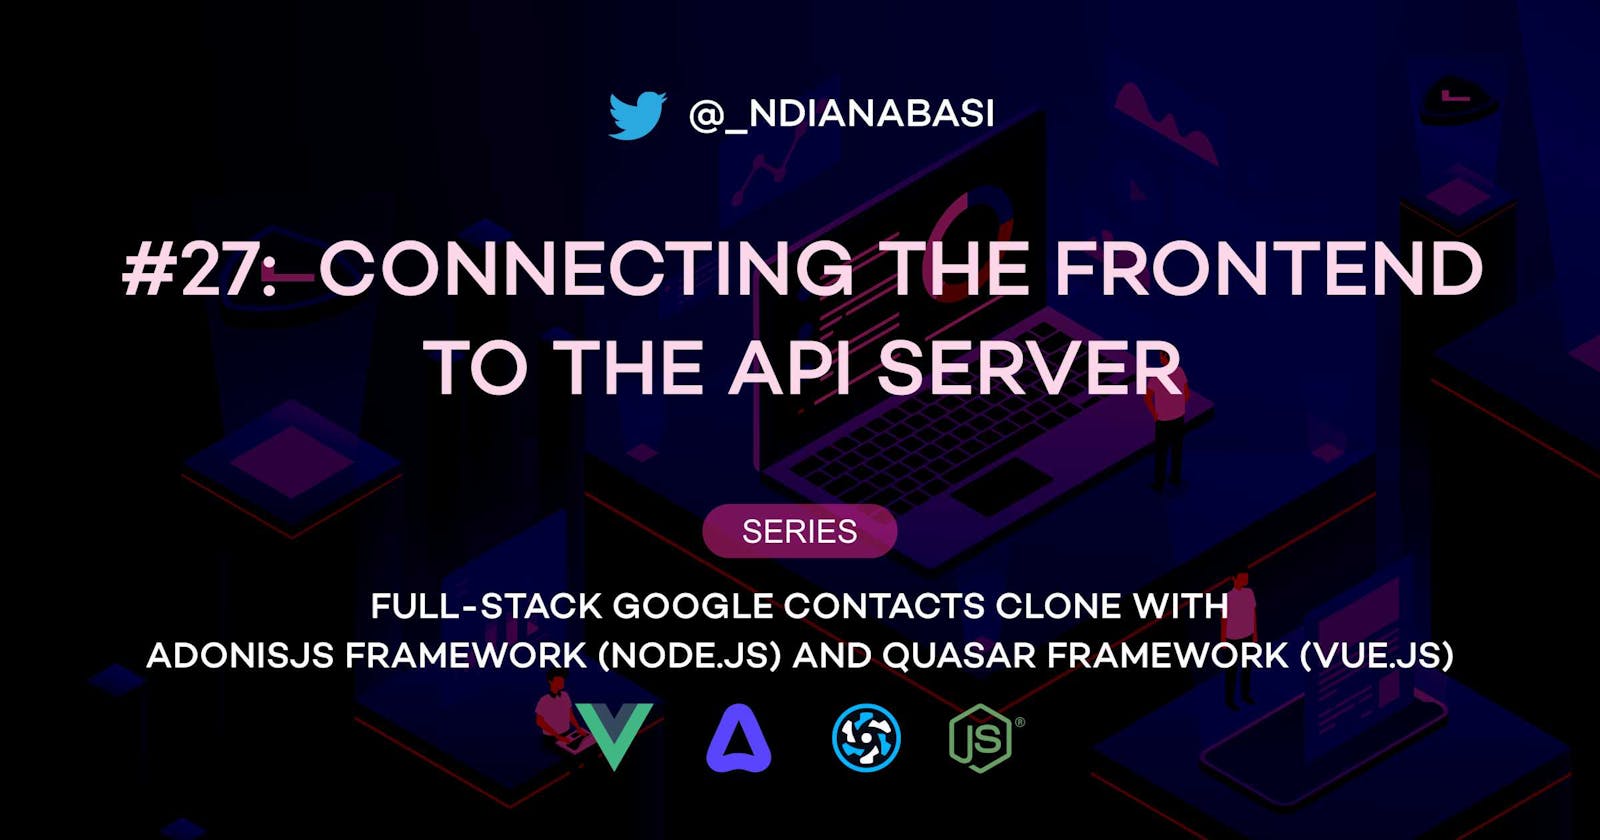 Connecting the Frontend to the API Server | Full-Stack Google Contacts Clone with AdonisJS Framework (Node.js) and Quasar Framework (Vue.js)